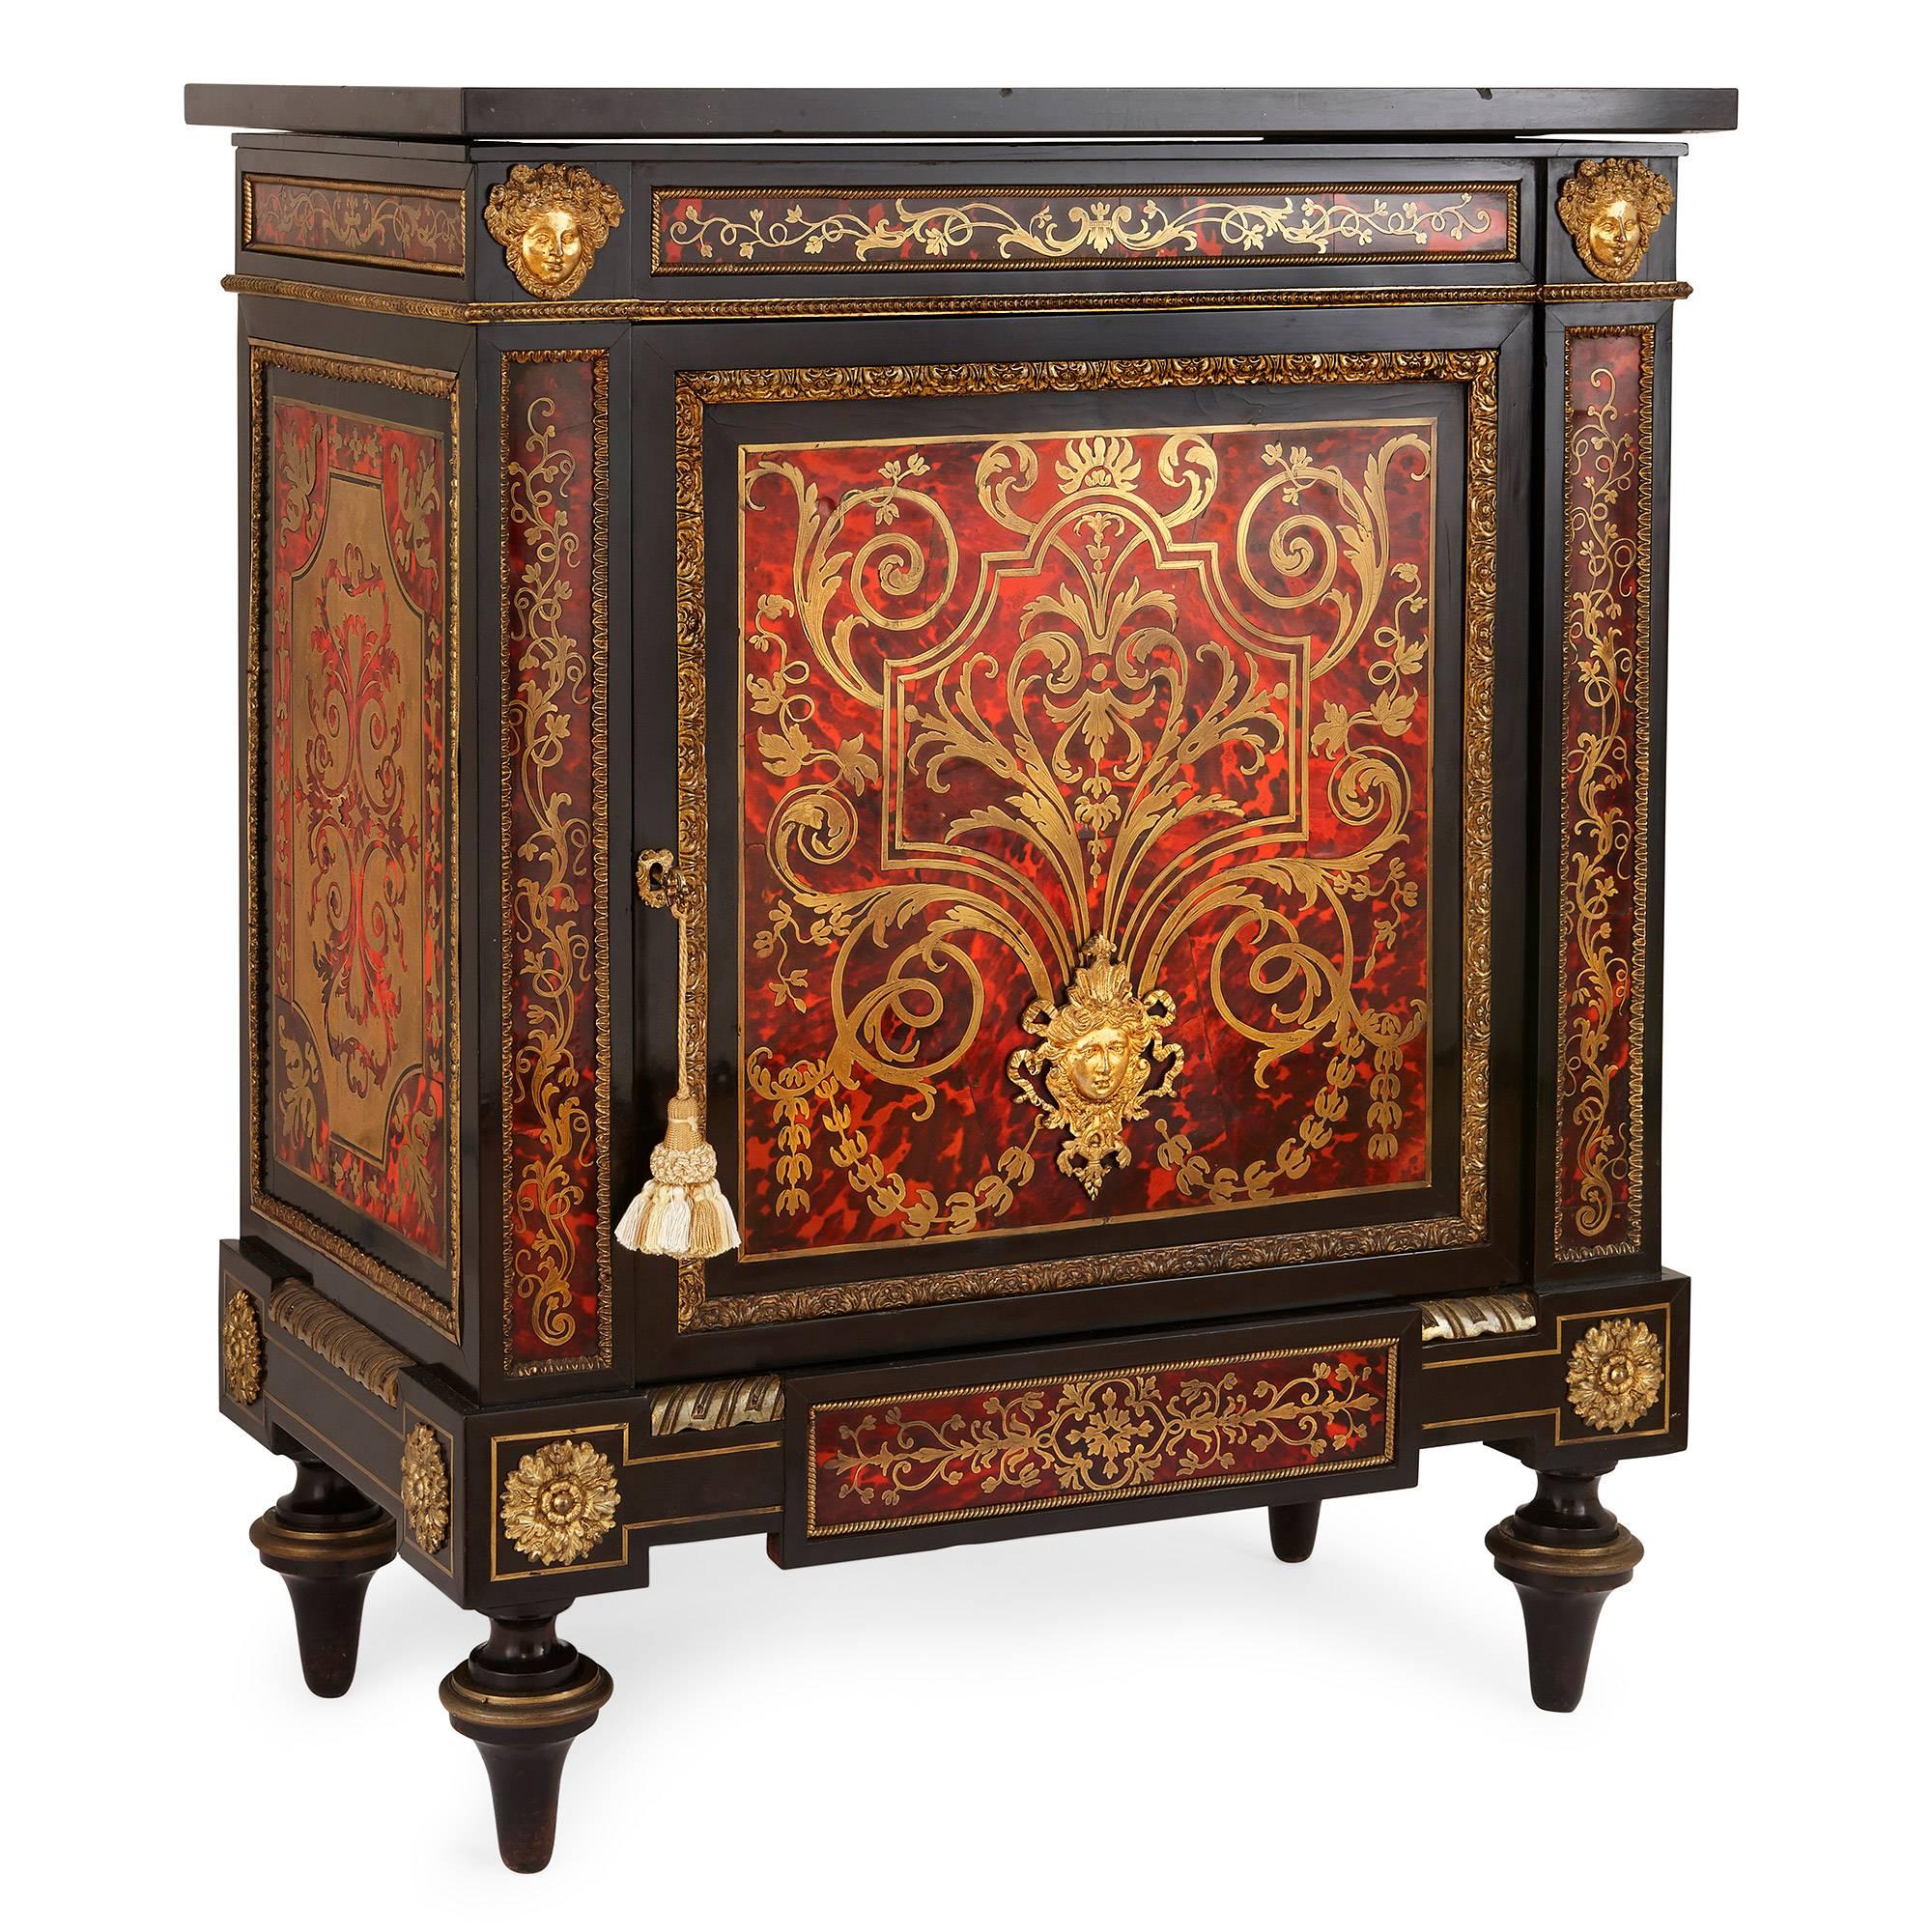 This antique French cabinet features intricate Boulle-style brass and tortoiseshell marquetry and is mounted with fine ormolu decorations. It is built from ebonized wood, takes a rectangular shape and is set on four cylindrical feet. The base of the